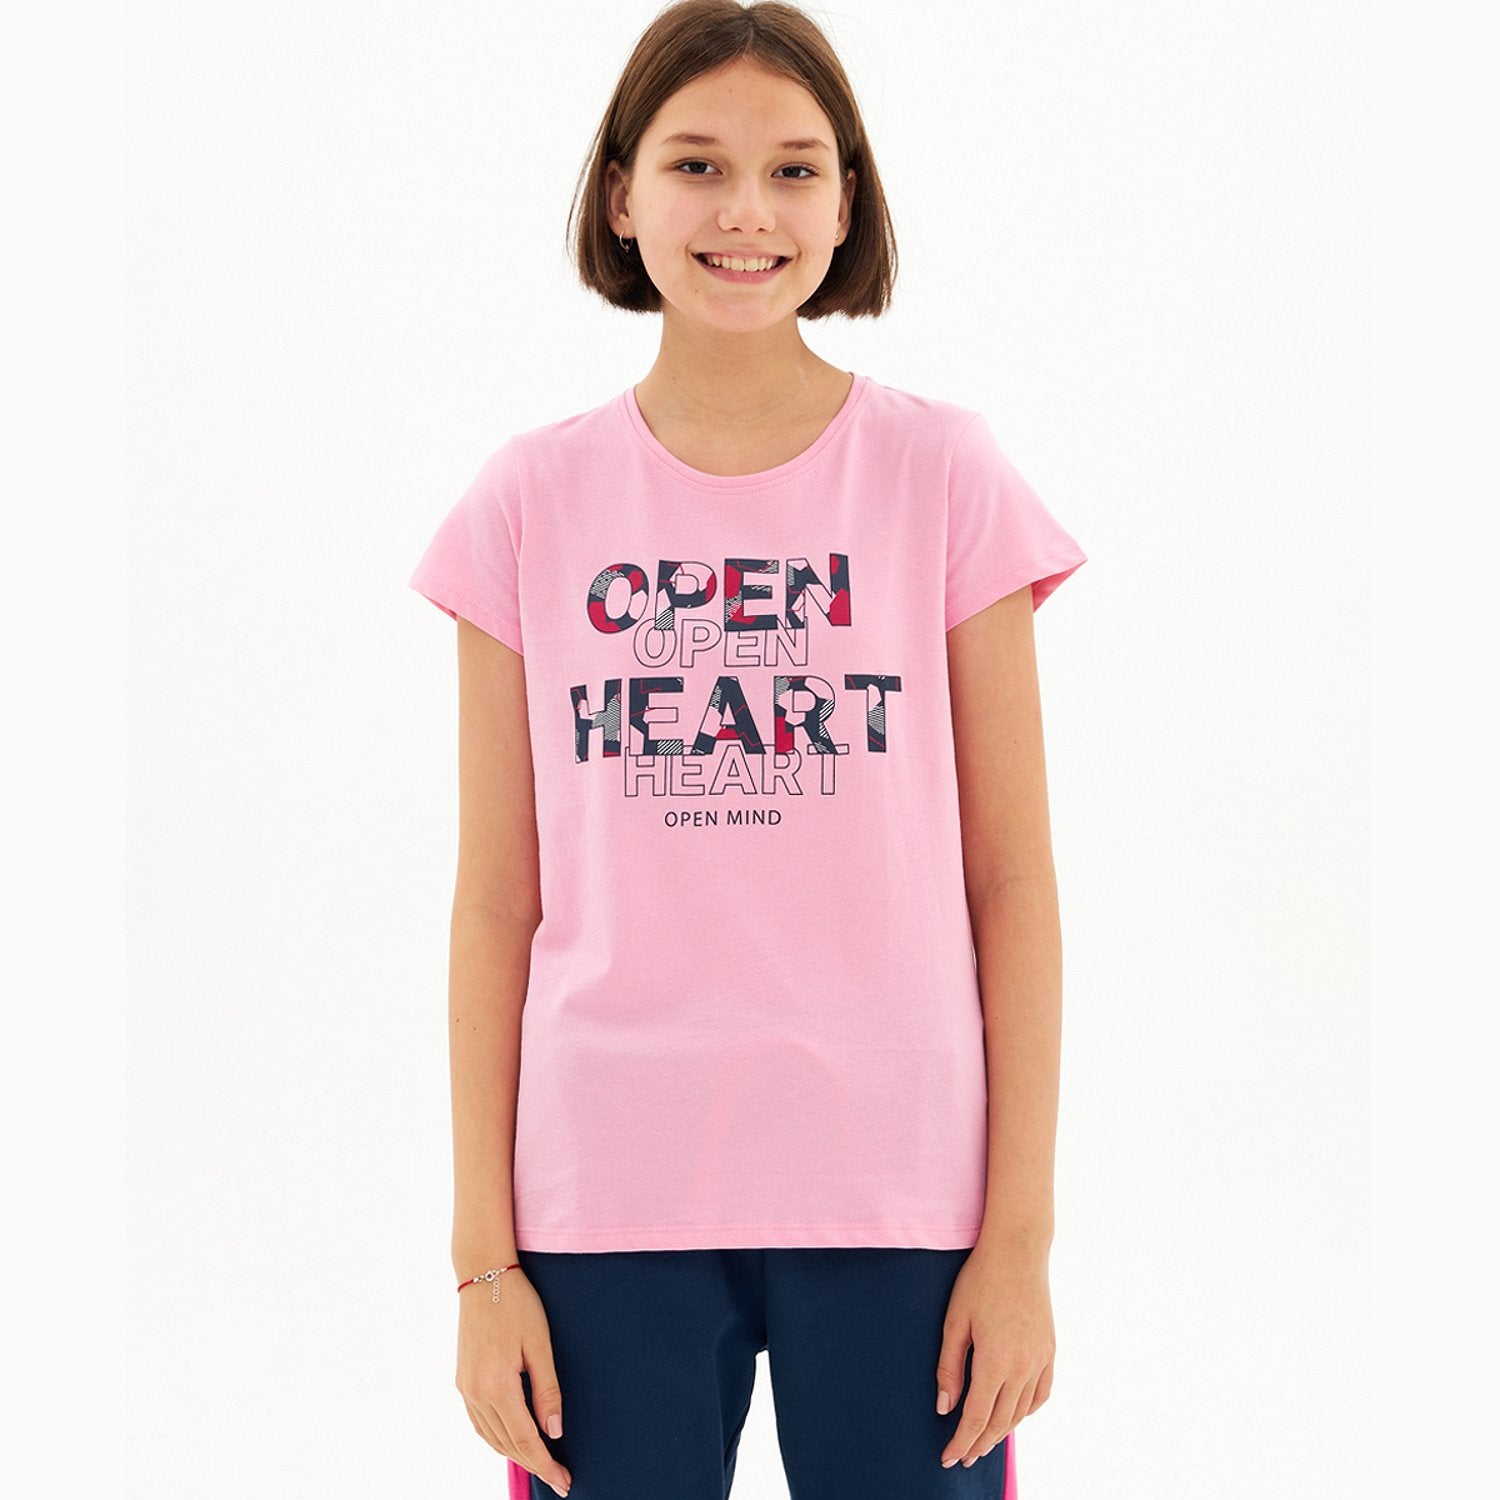 Cotton pink girls' t-shirt with the `` Open heart '' inscription